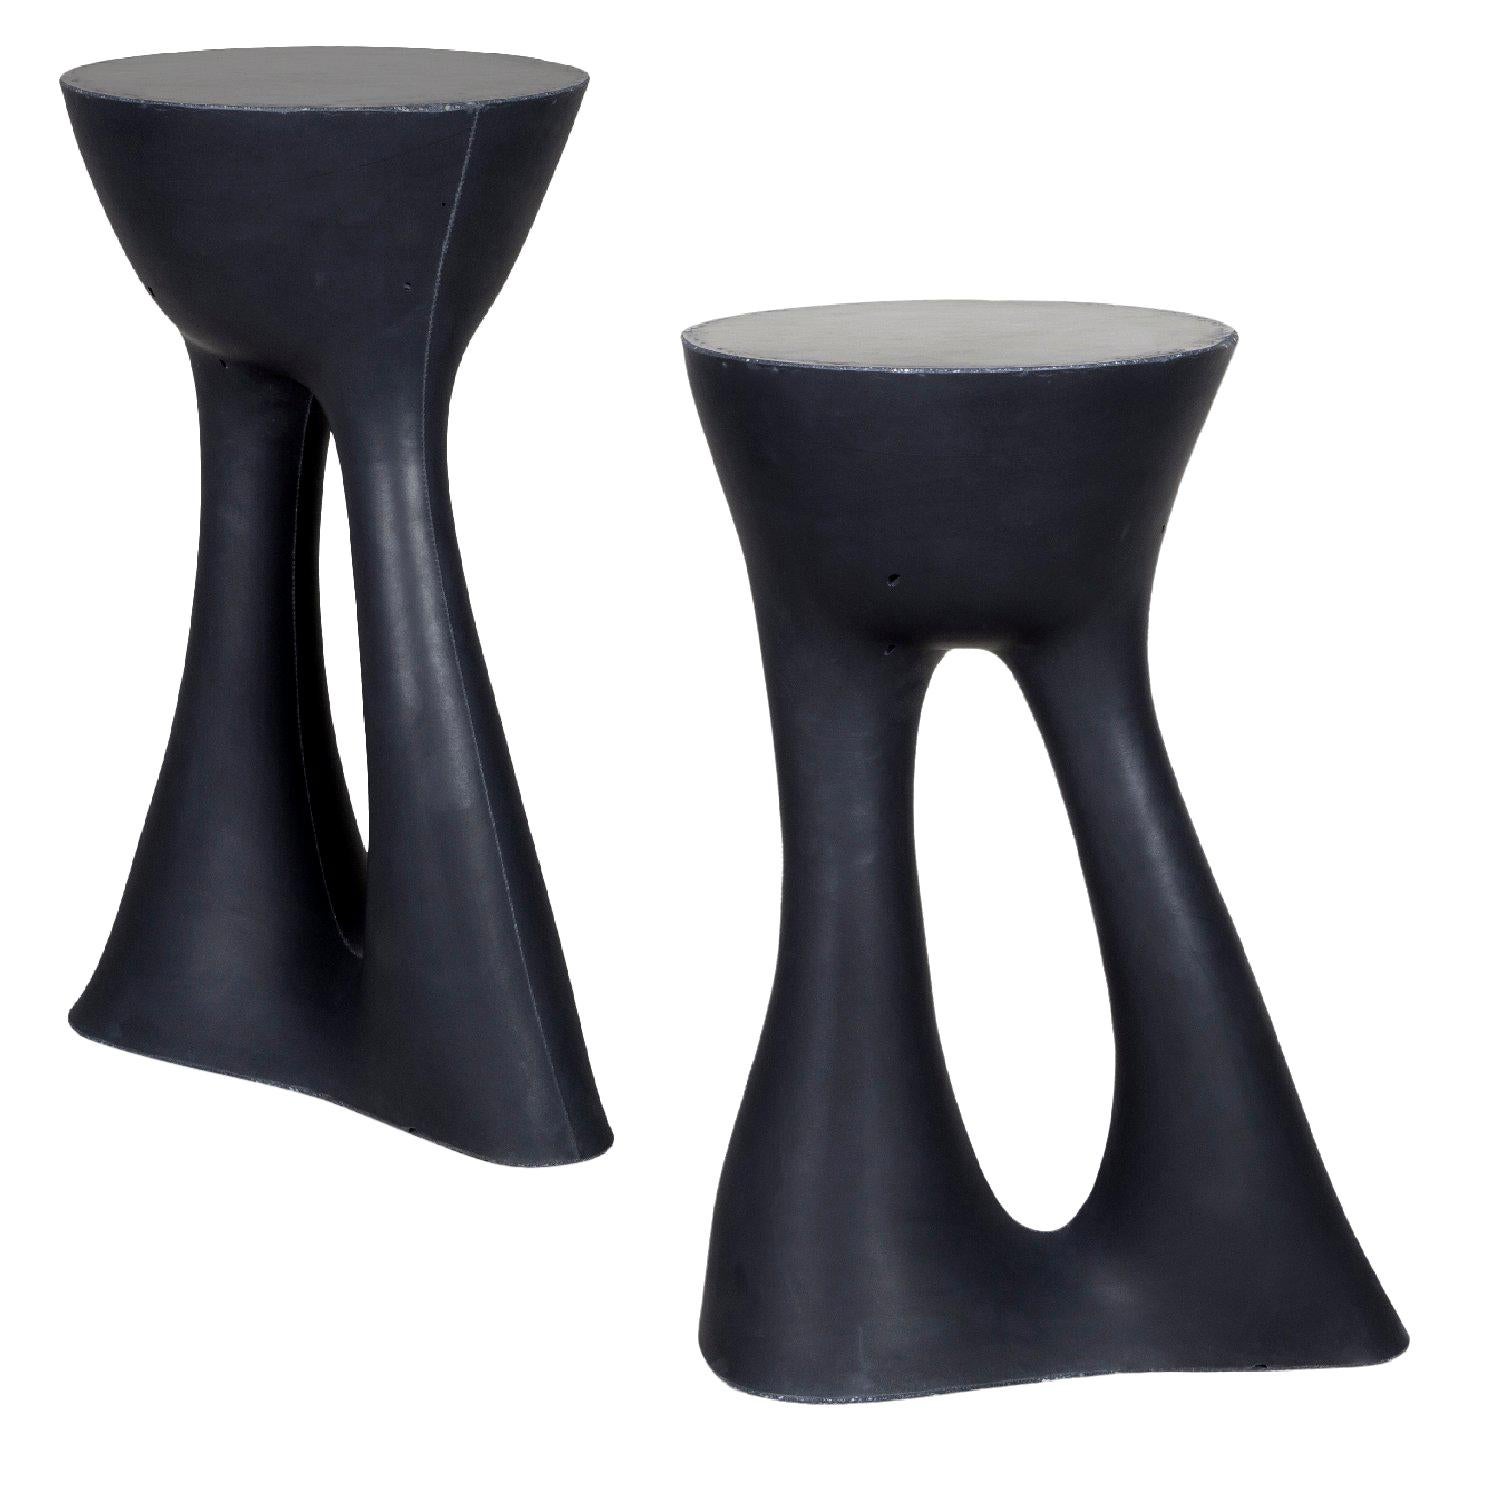 Pair of Black Kreten Side Tables from Souda, Tall, Made to Order